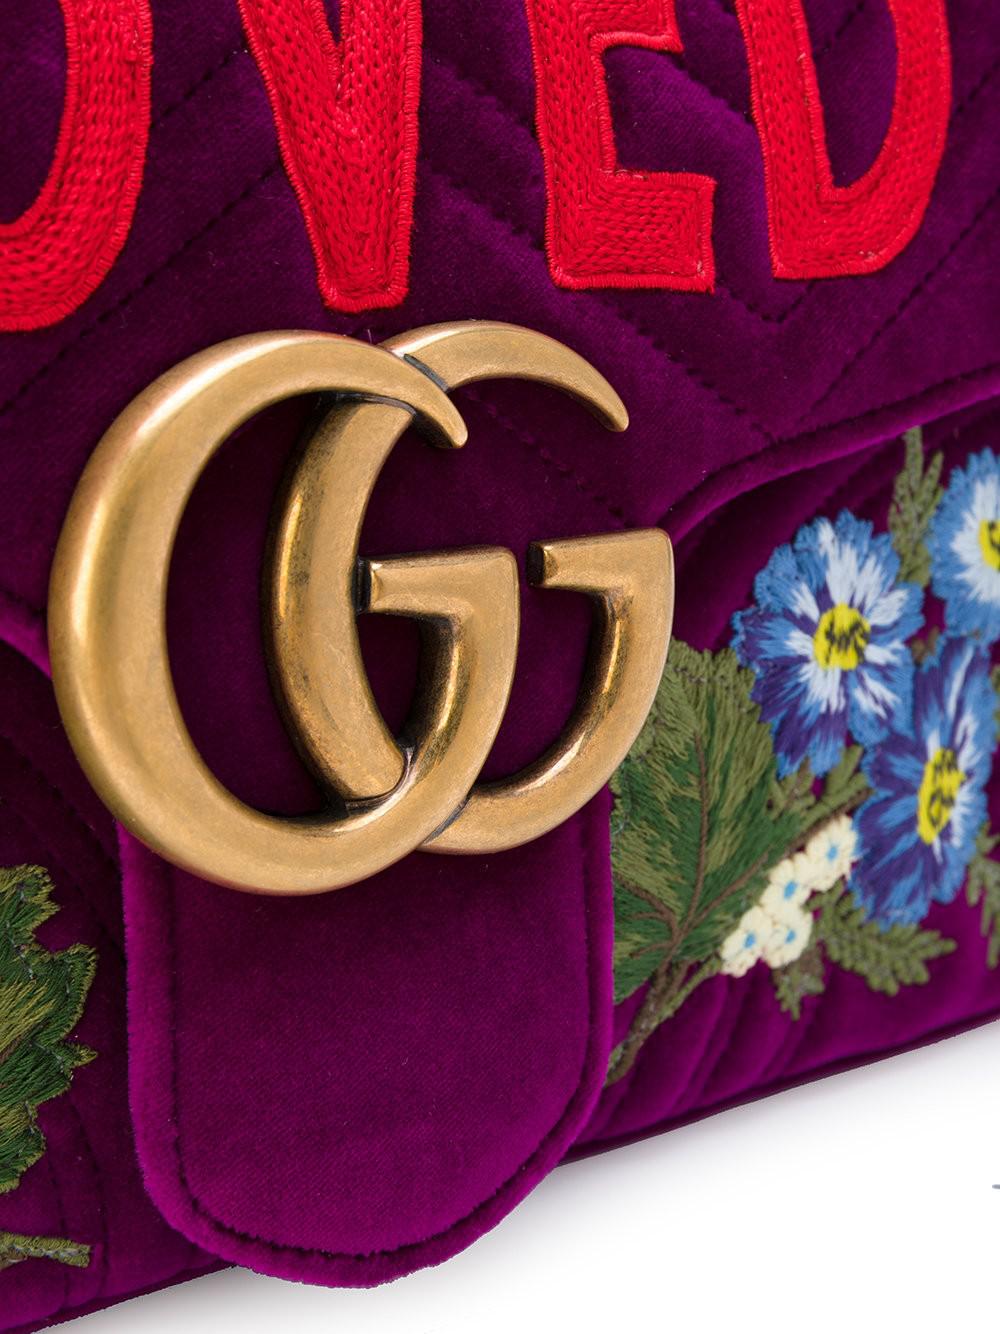 Gucci Velvet Gg Marmont Loved Bag in Pink/Purple (Purple) - Lyst